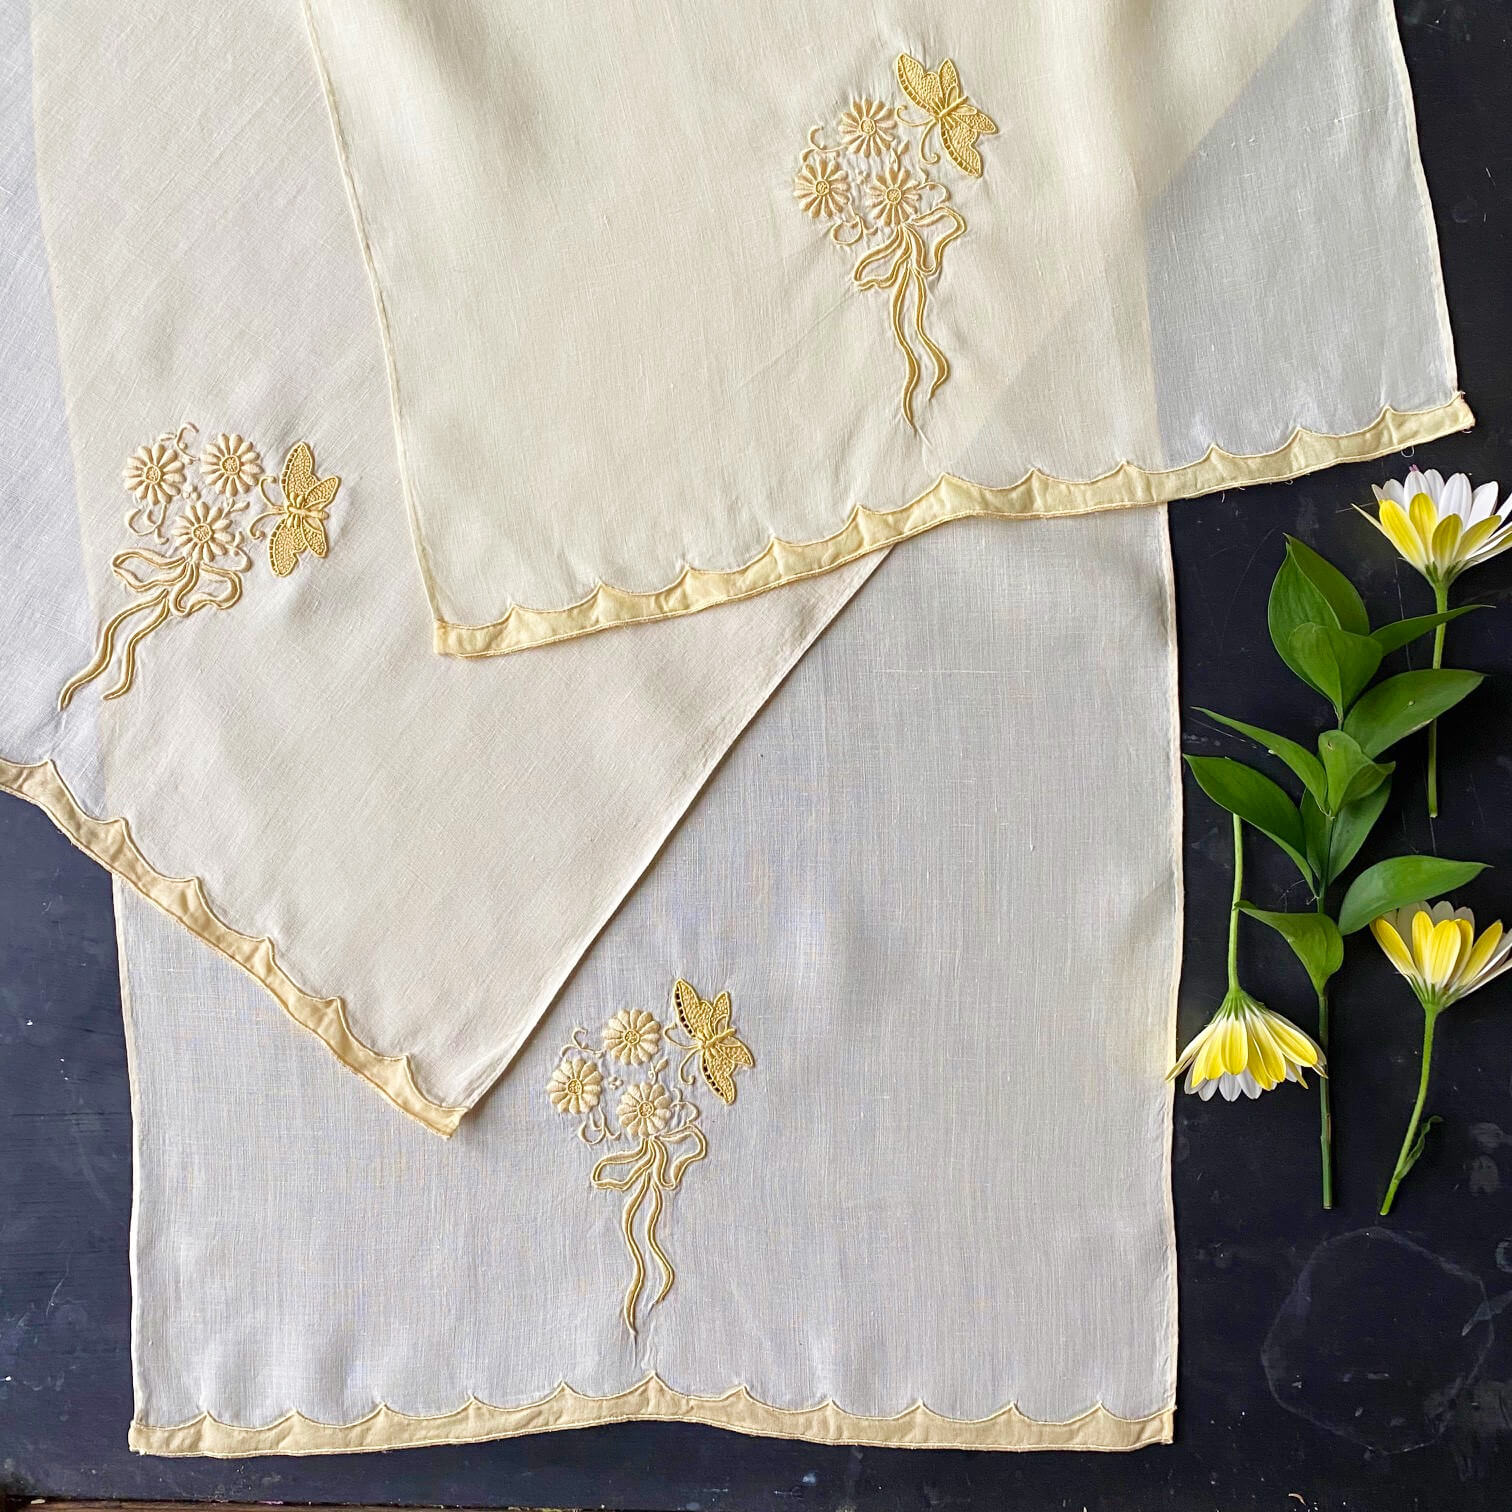 Vintage 1950s Marghab Yellow Butterfly Linens - Guest Towel Size - Embroidered Flowers & Butterfly - Set of Three